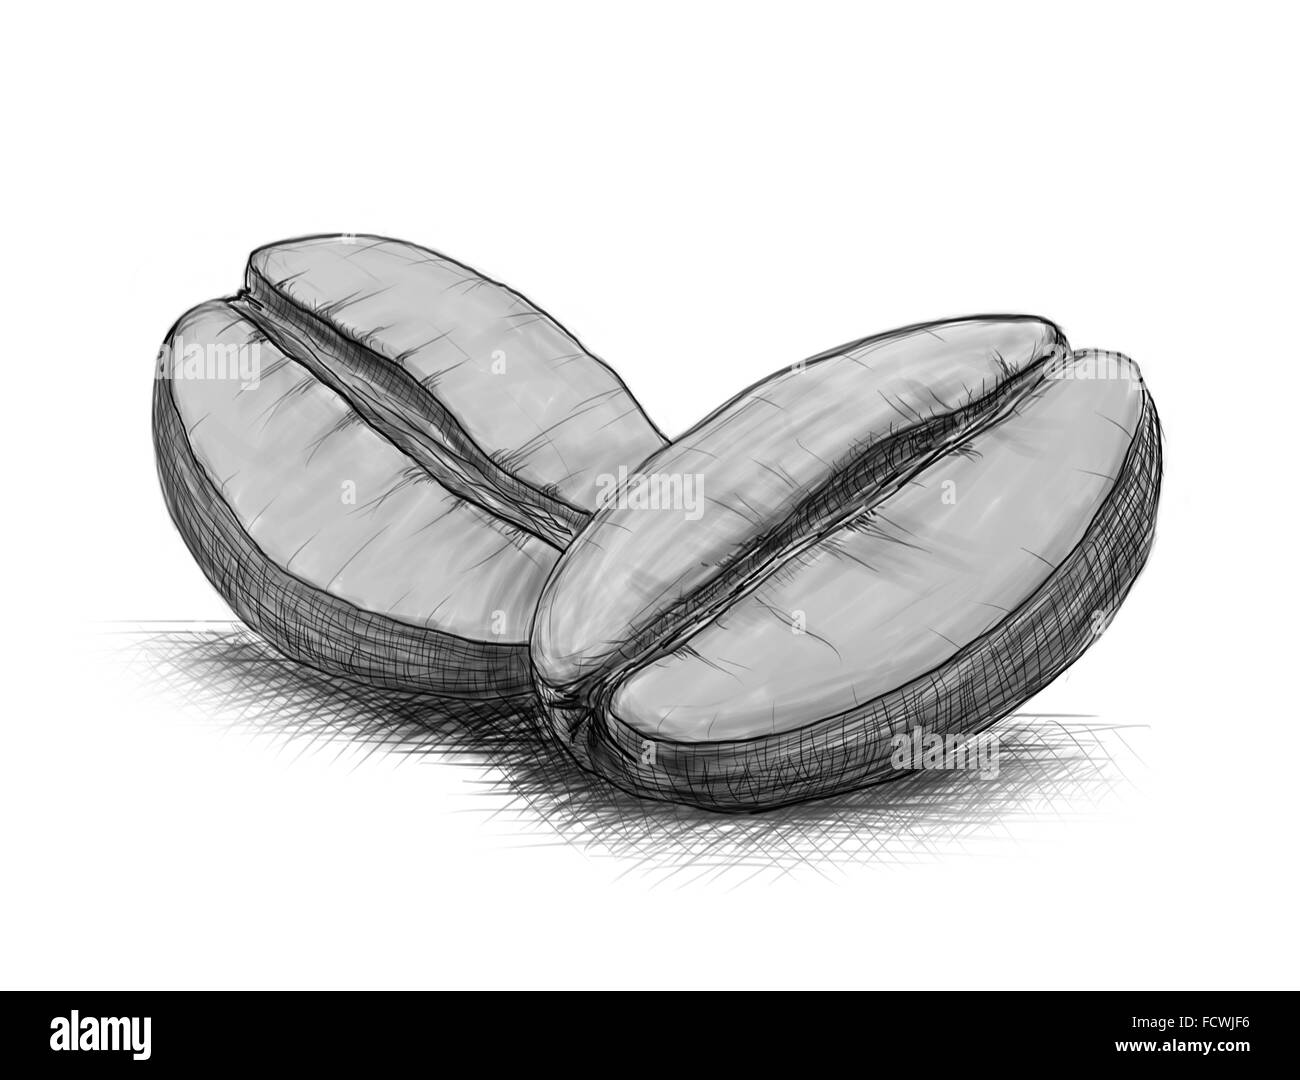 hand-drawn sketch of coffee beans on a white background Stock Photo